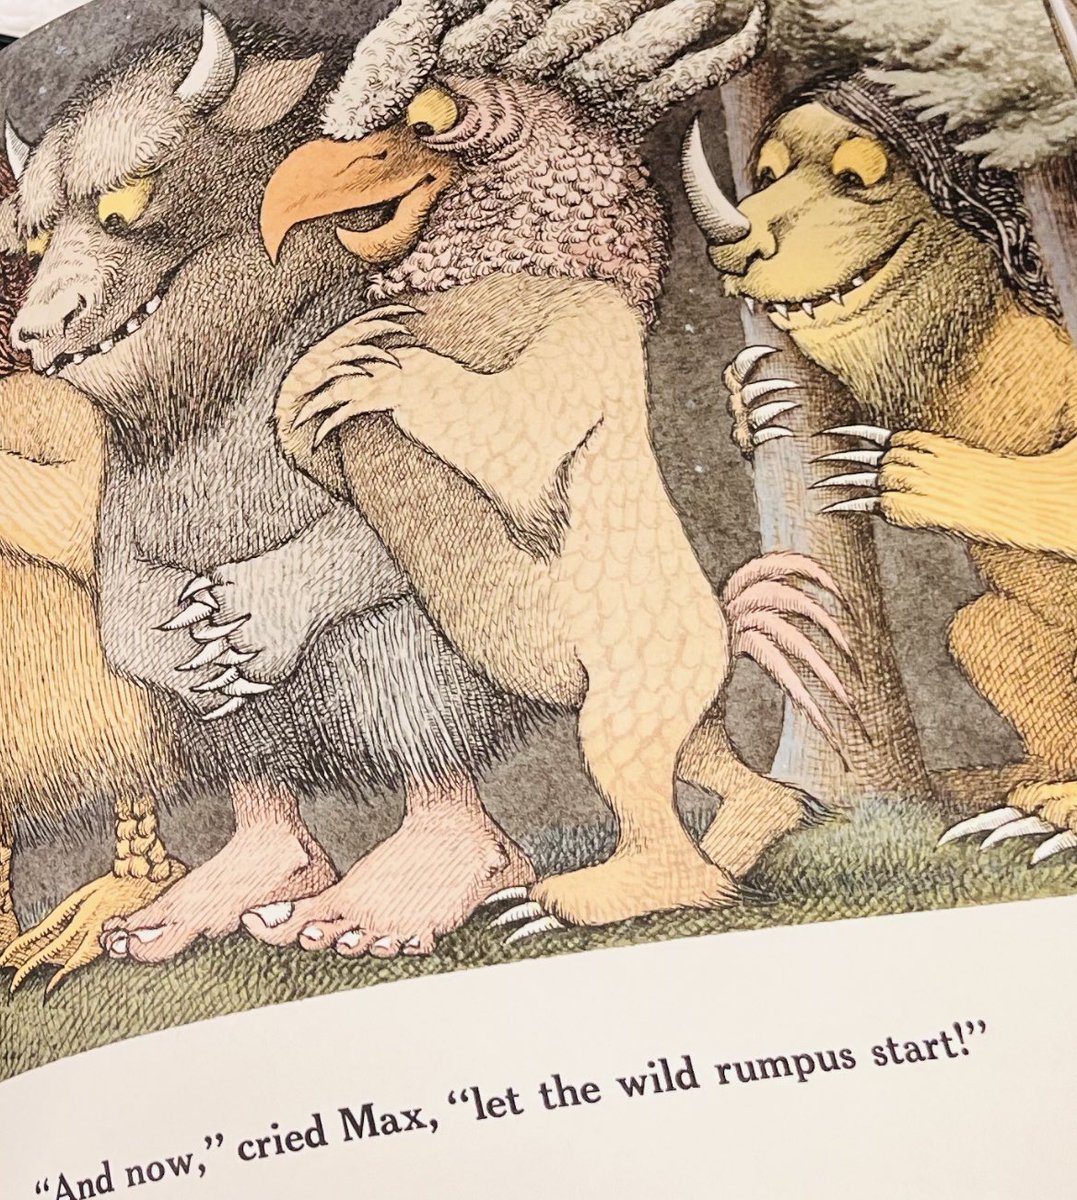 A favorite childhood story, I saw this book today, opened to this page, and thought, Yupp, “monsters, cocks and weirdos, the bastards must have ate my knight in shining armor!” Or did they, next book sequel🌎❤️✍🏼🏰#2ndHalfBestHalf #wherethewildthingsare #monsters #cocks #weirdos